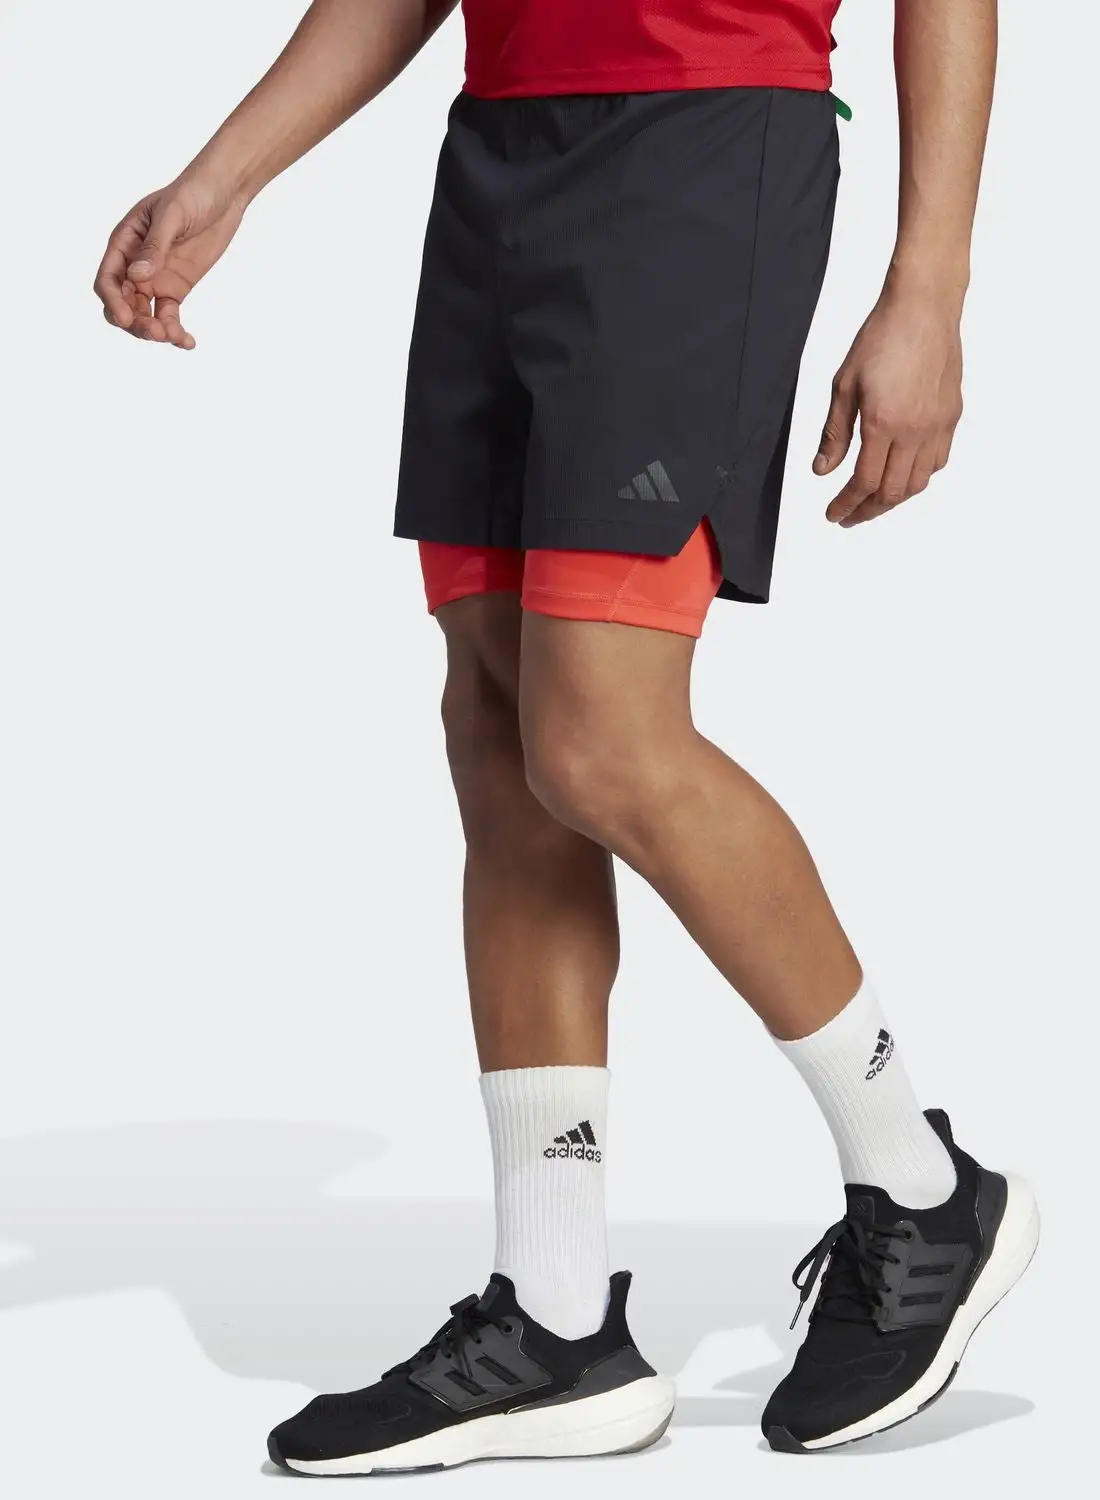 Adidas 2 In 1 Power Workout Shorts